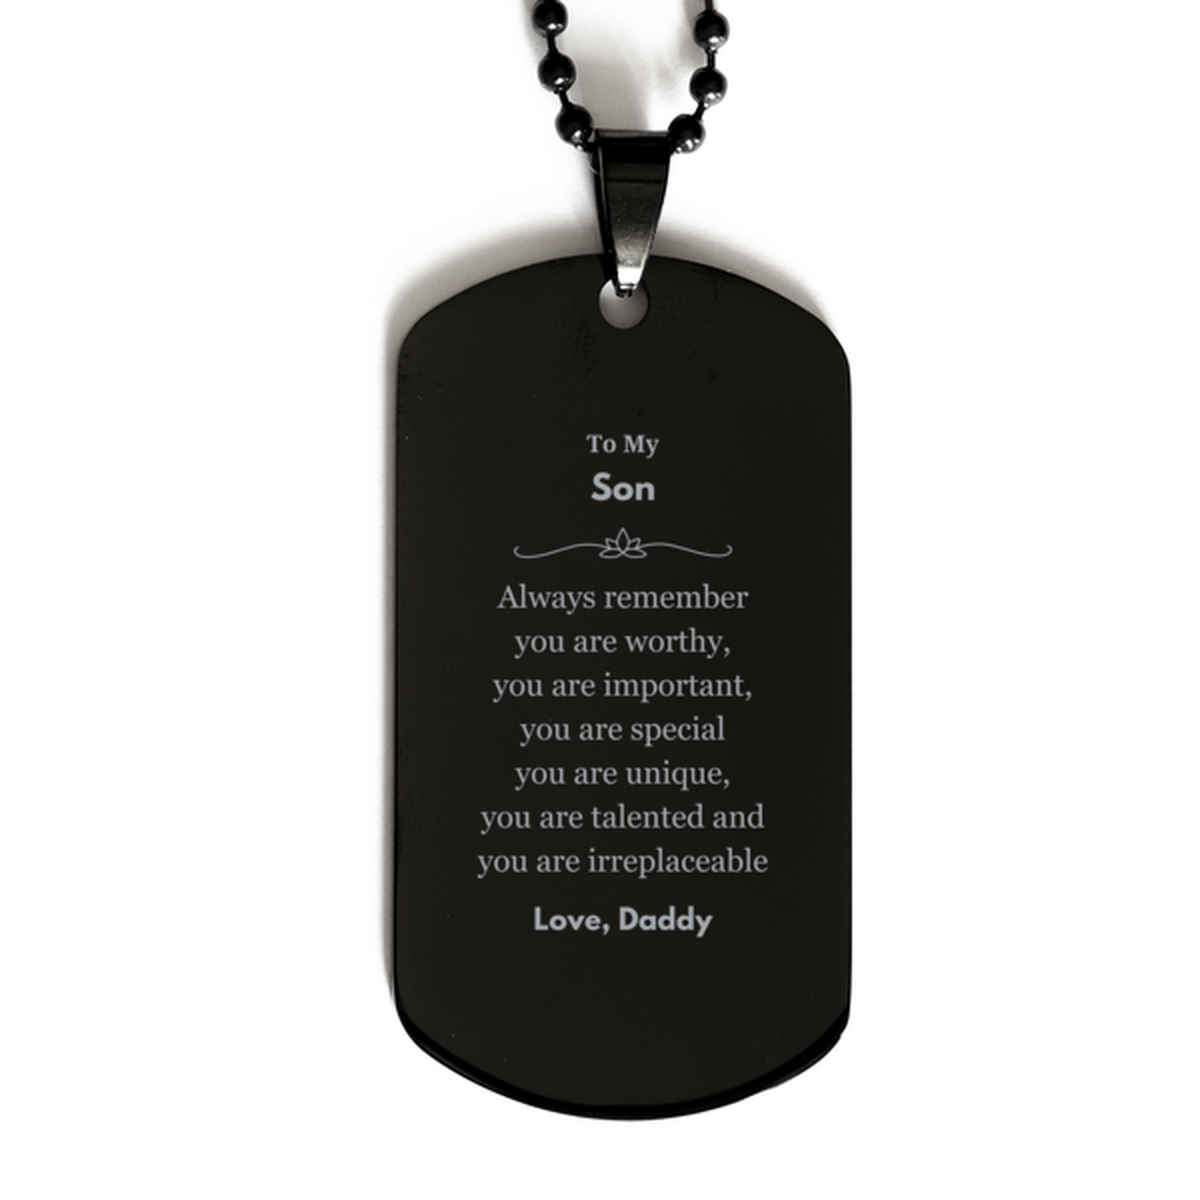 Son Birthday Gifts from Daddy, Inspirational Black Dog Tag for Son Christmas Graduation Gifts for Son Always remember you are worthy, you are important. Love, Daddy